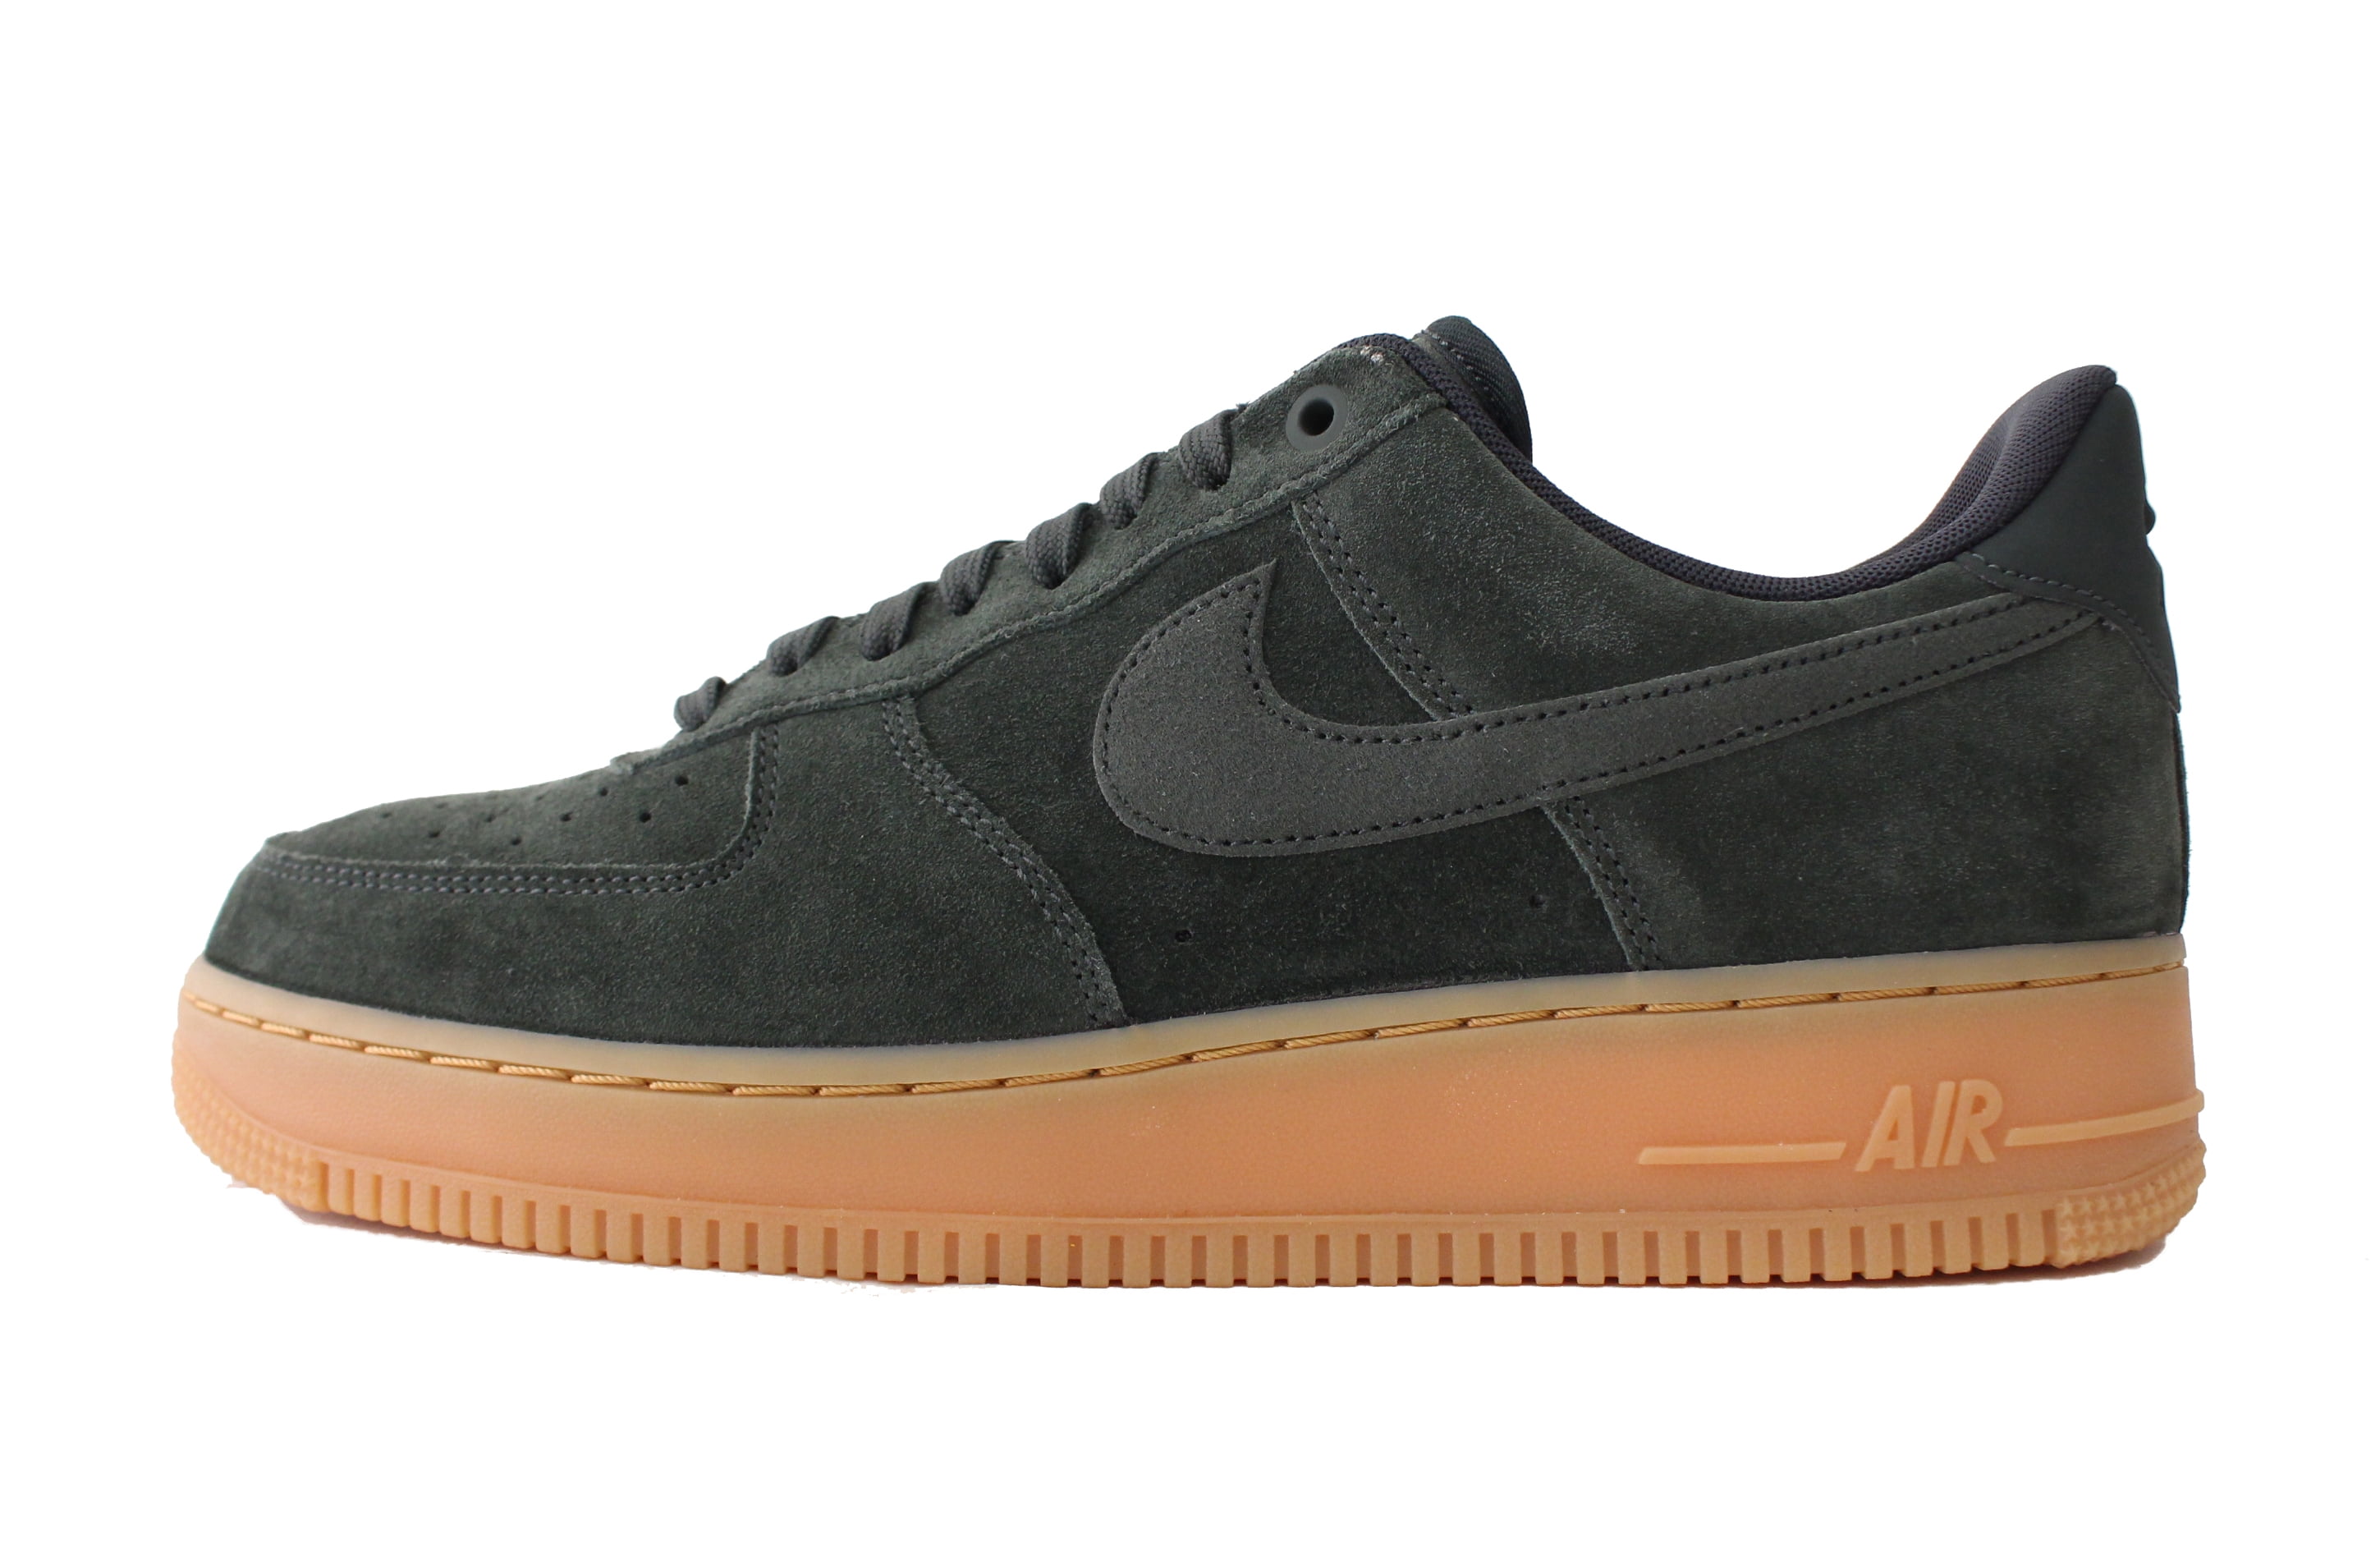 Nike Air Force 1 Low '07 LV8 Suede Outdoor Green Gum Men's